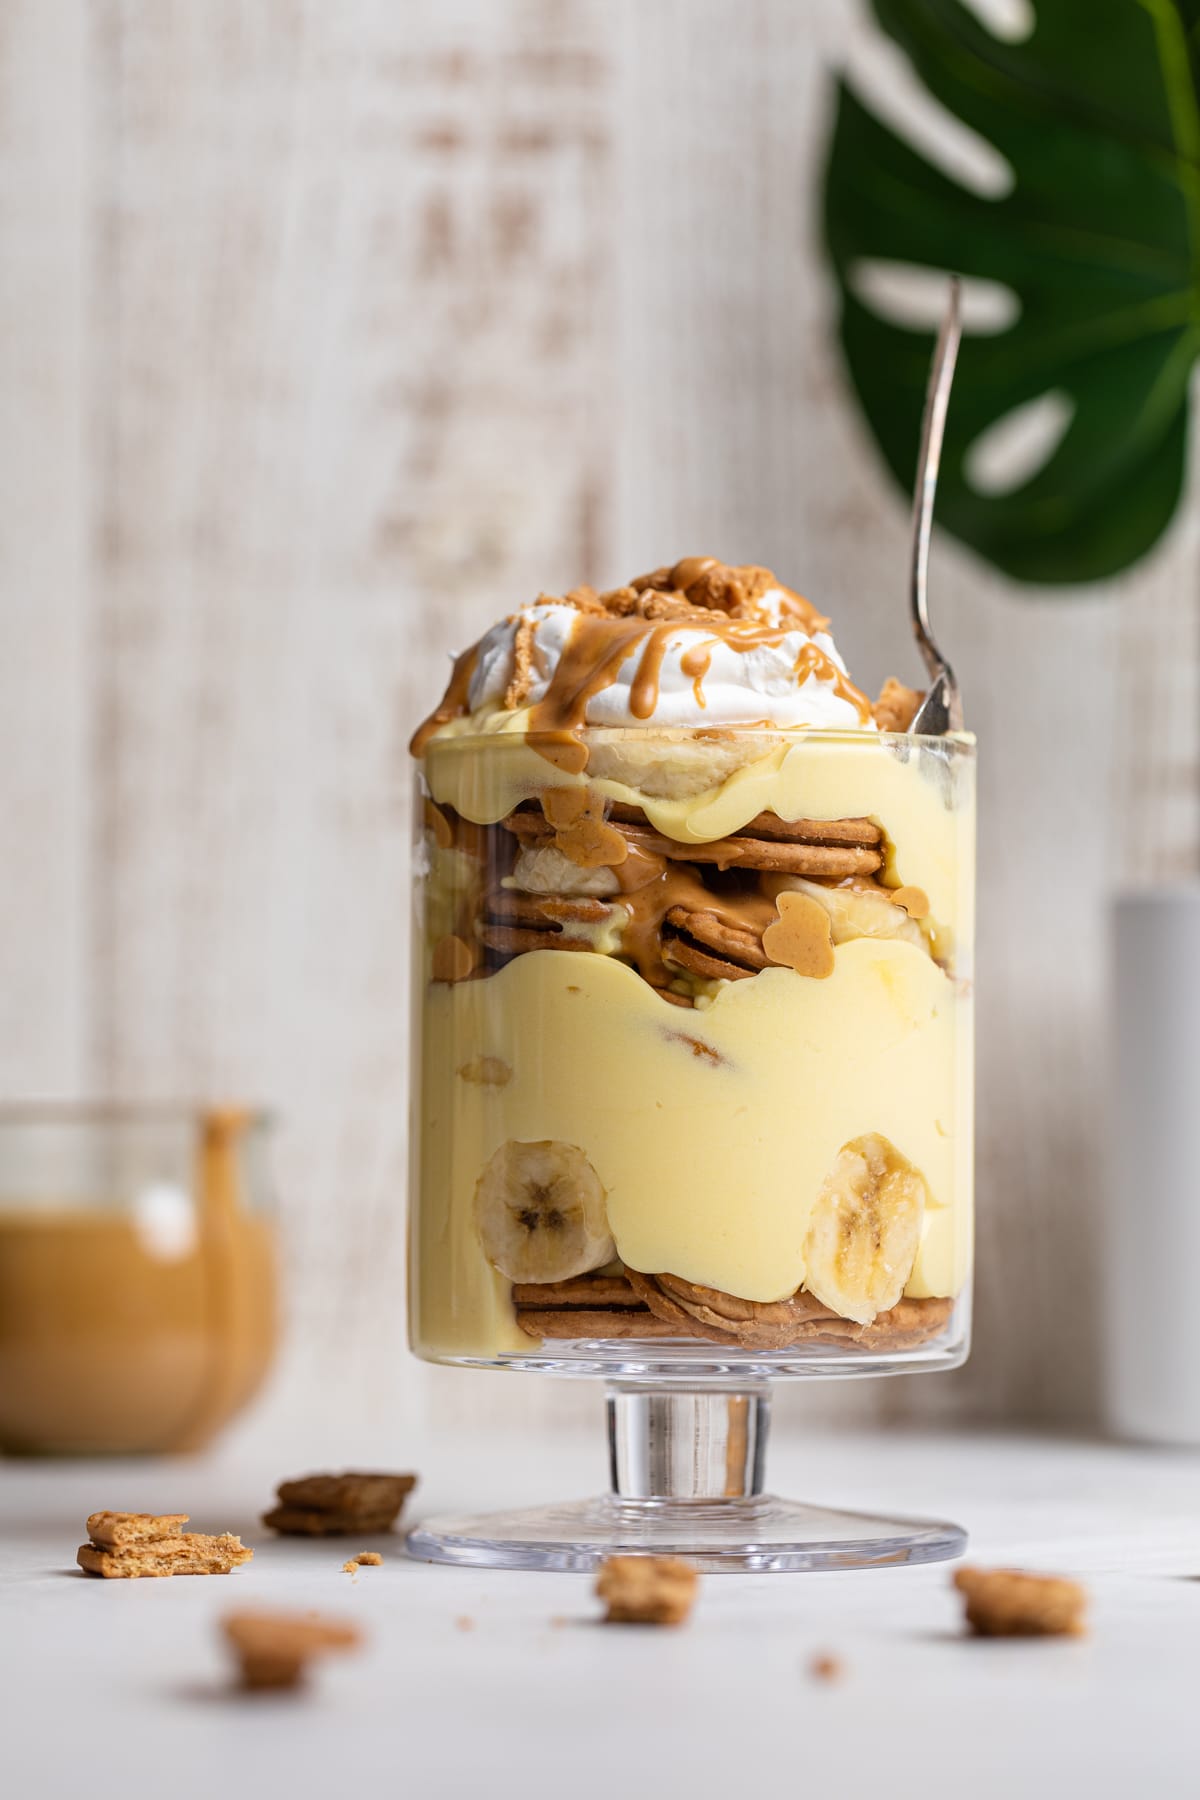 Spoon in a glass of Peanut Butter Banana Pudding.